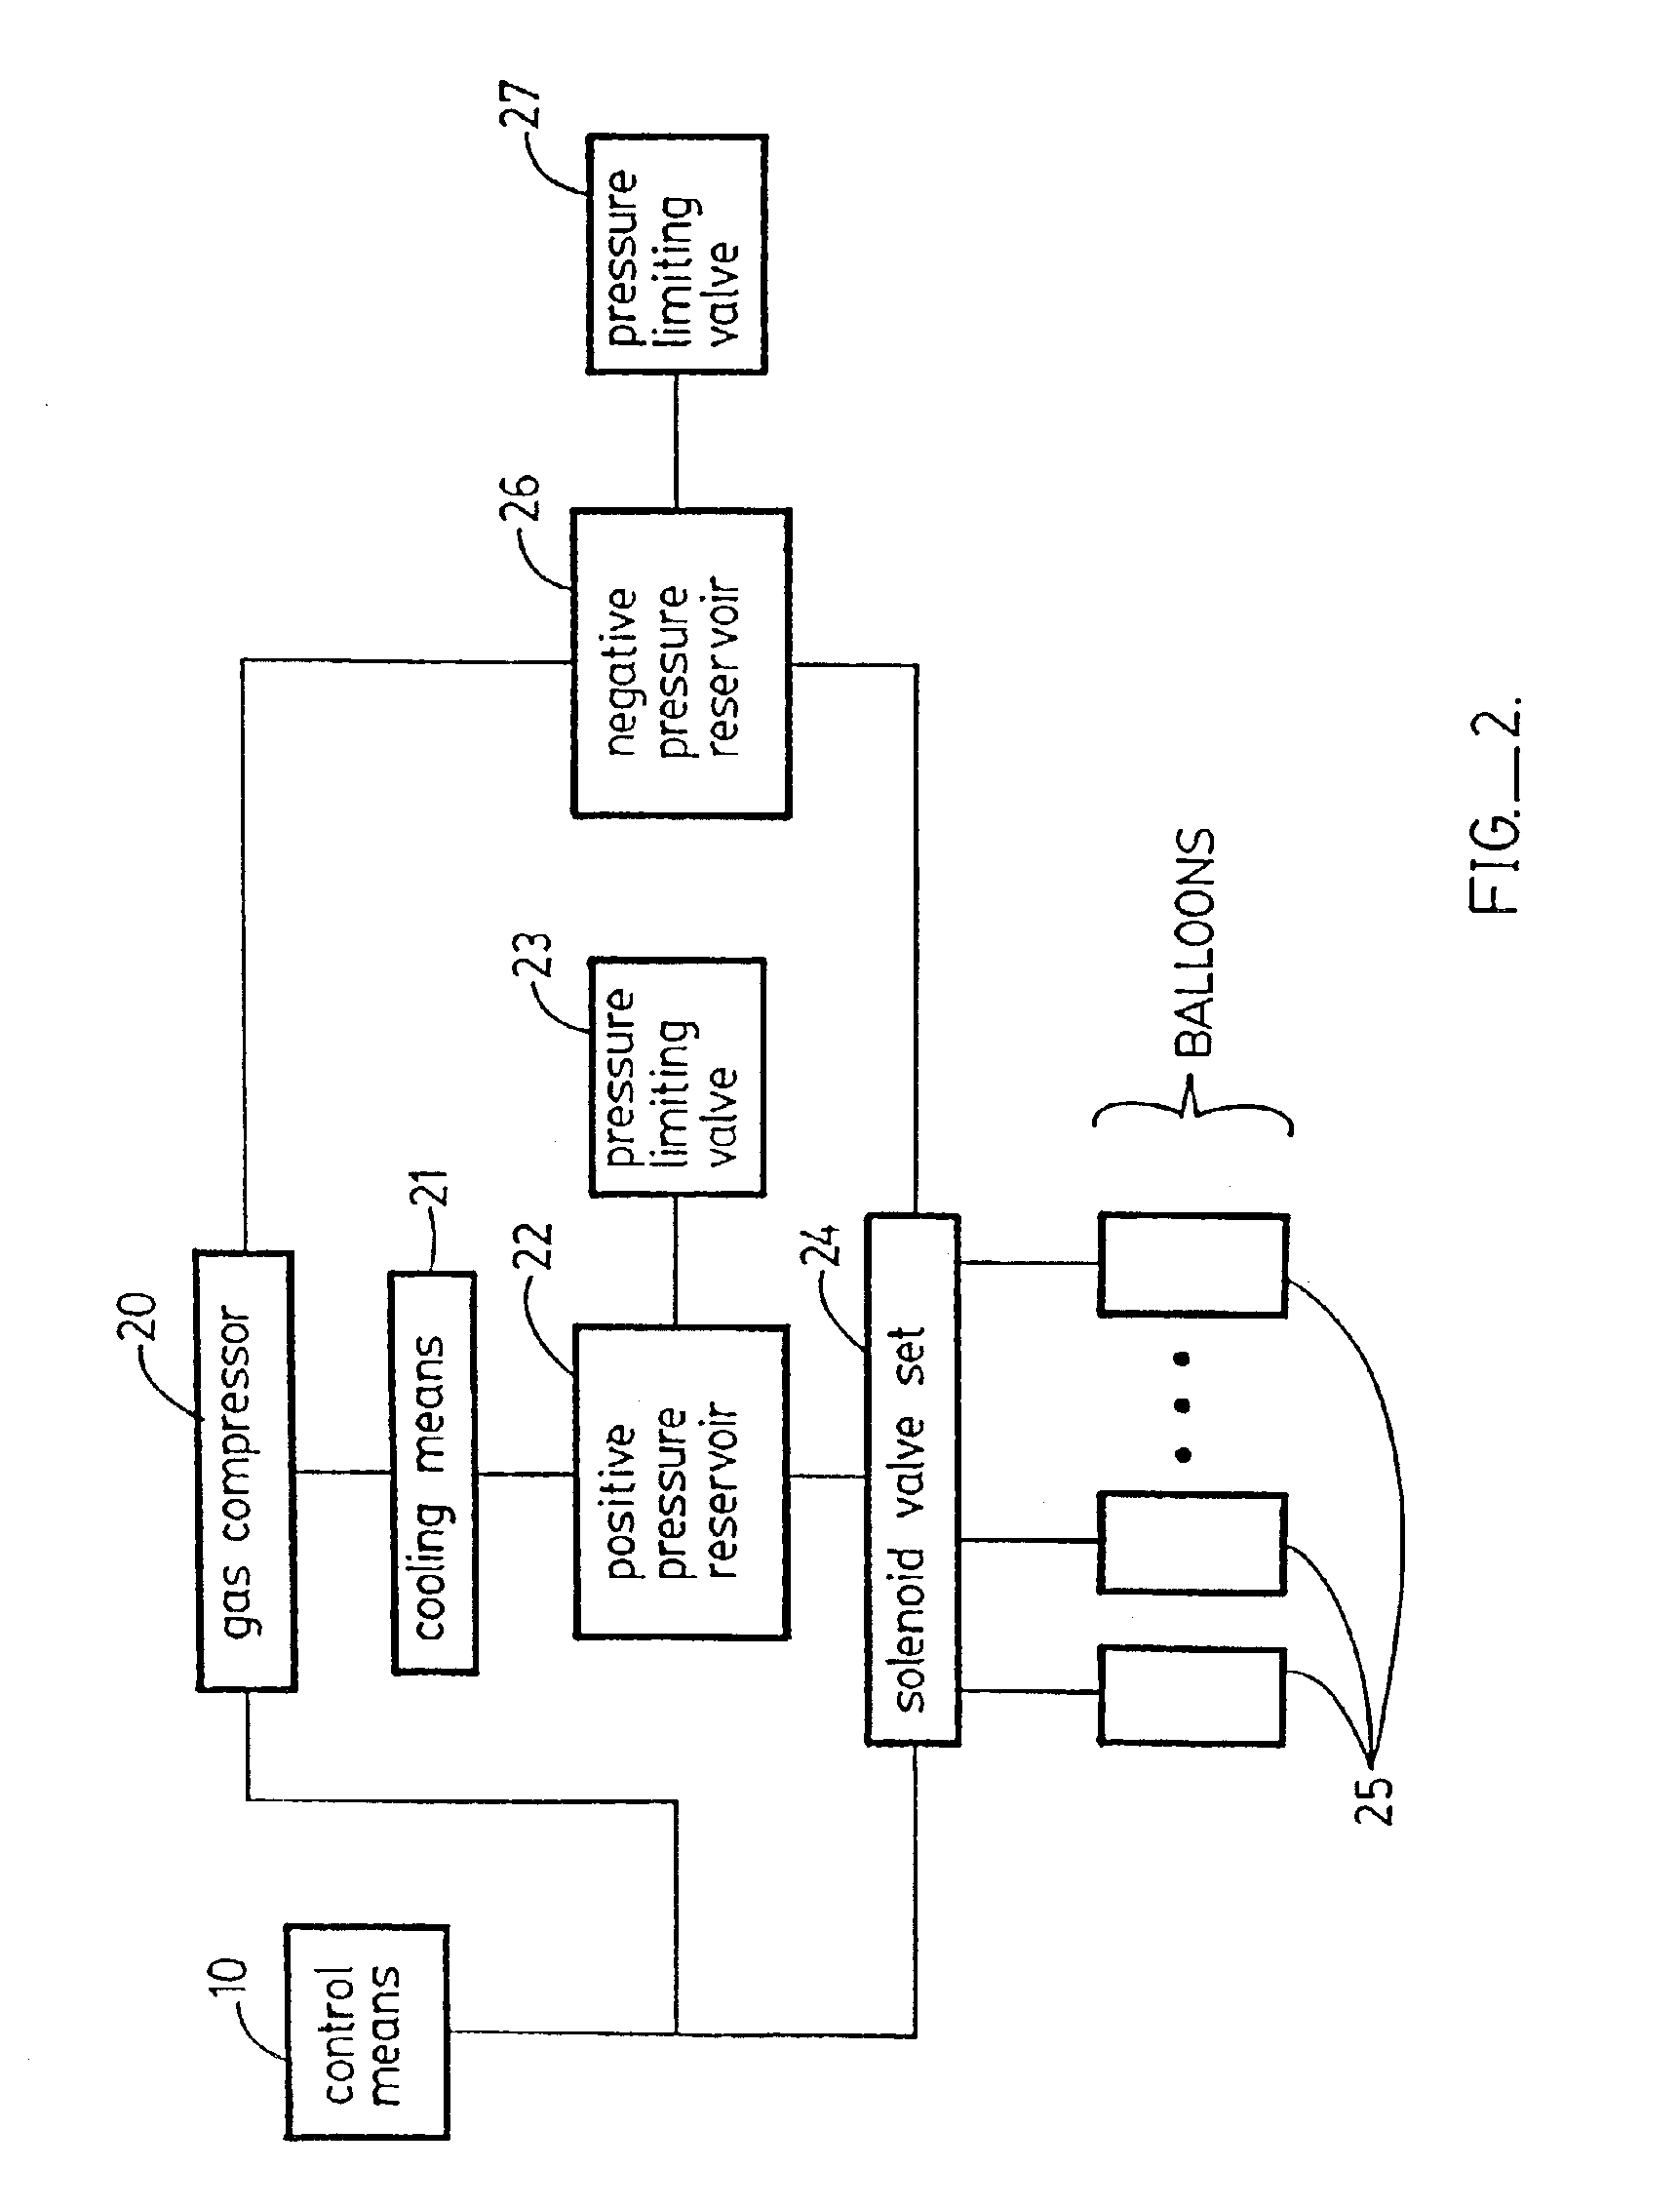 High efficiency external counterpulsation apparatus and method for controlling same